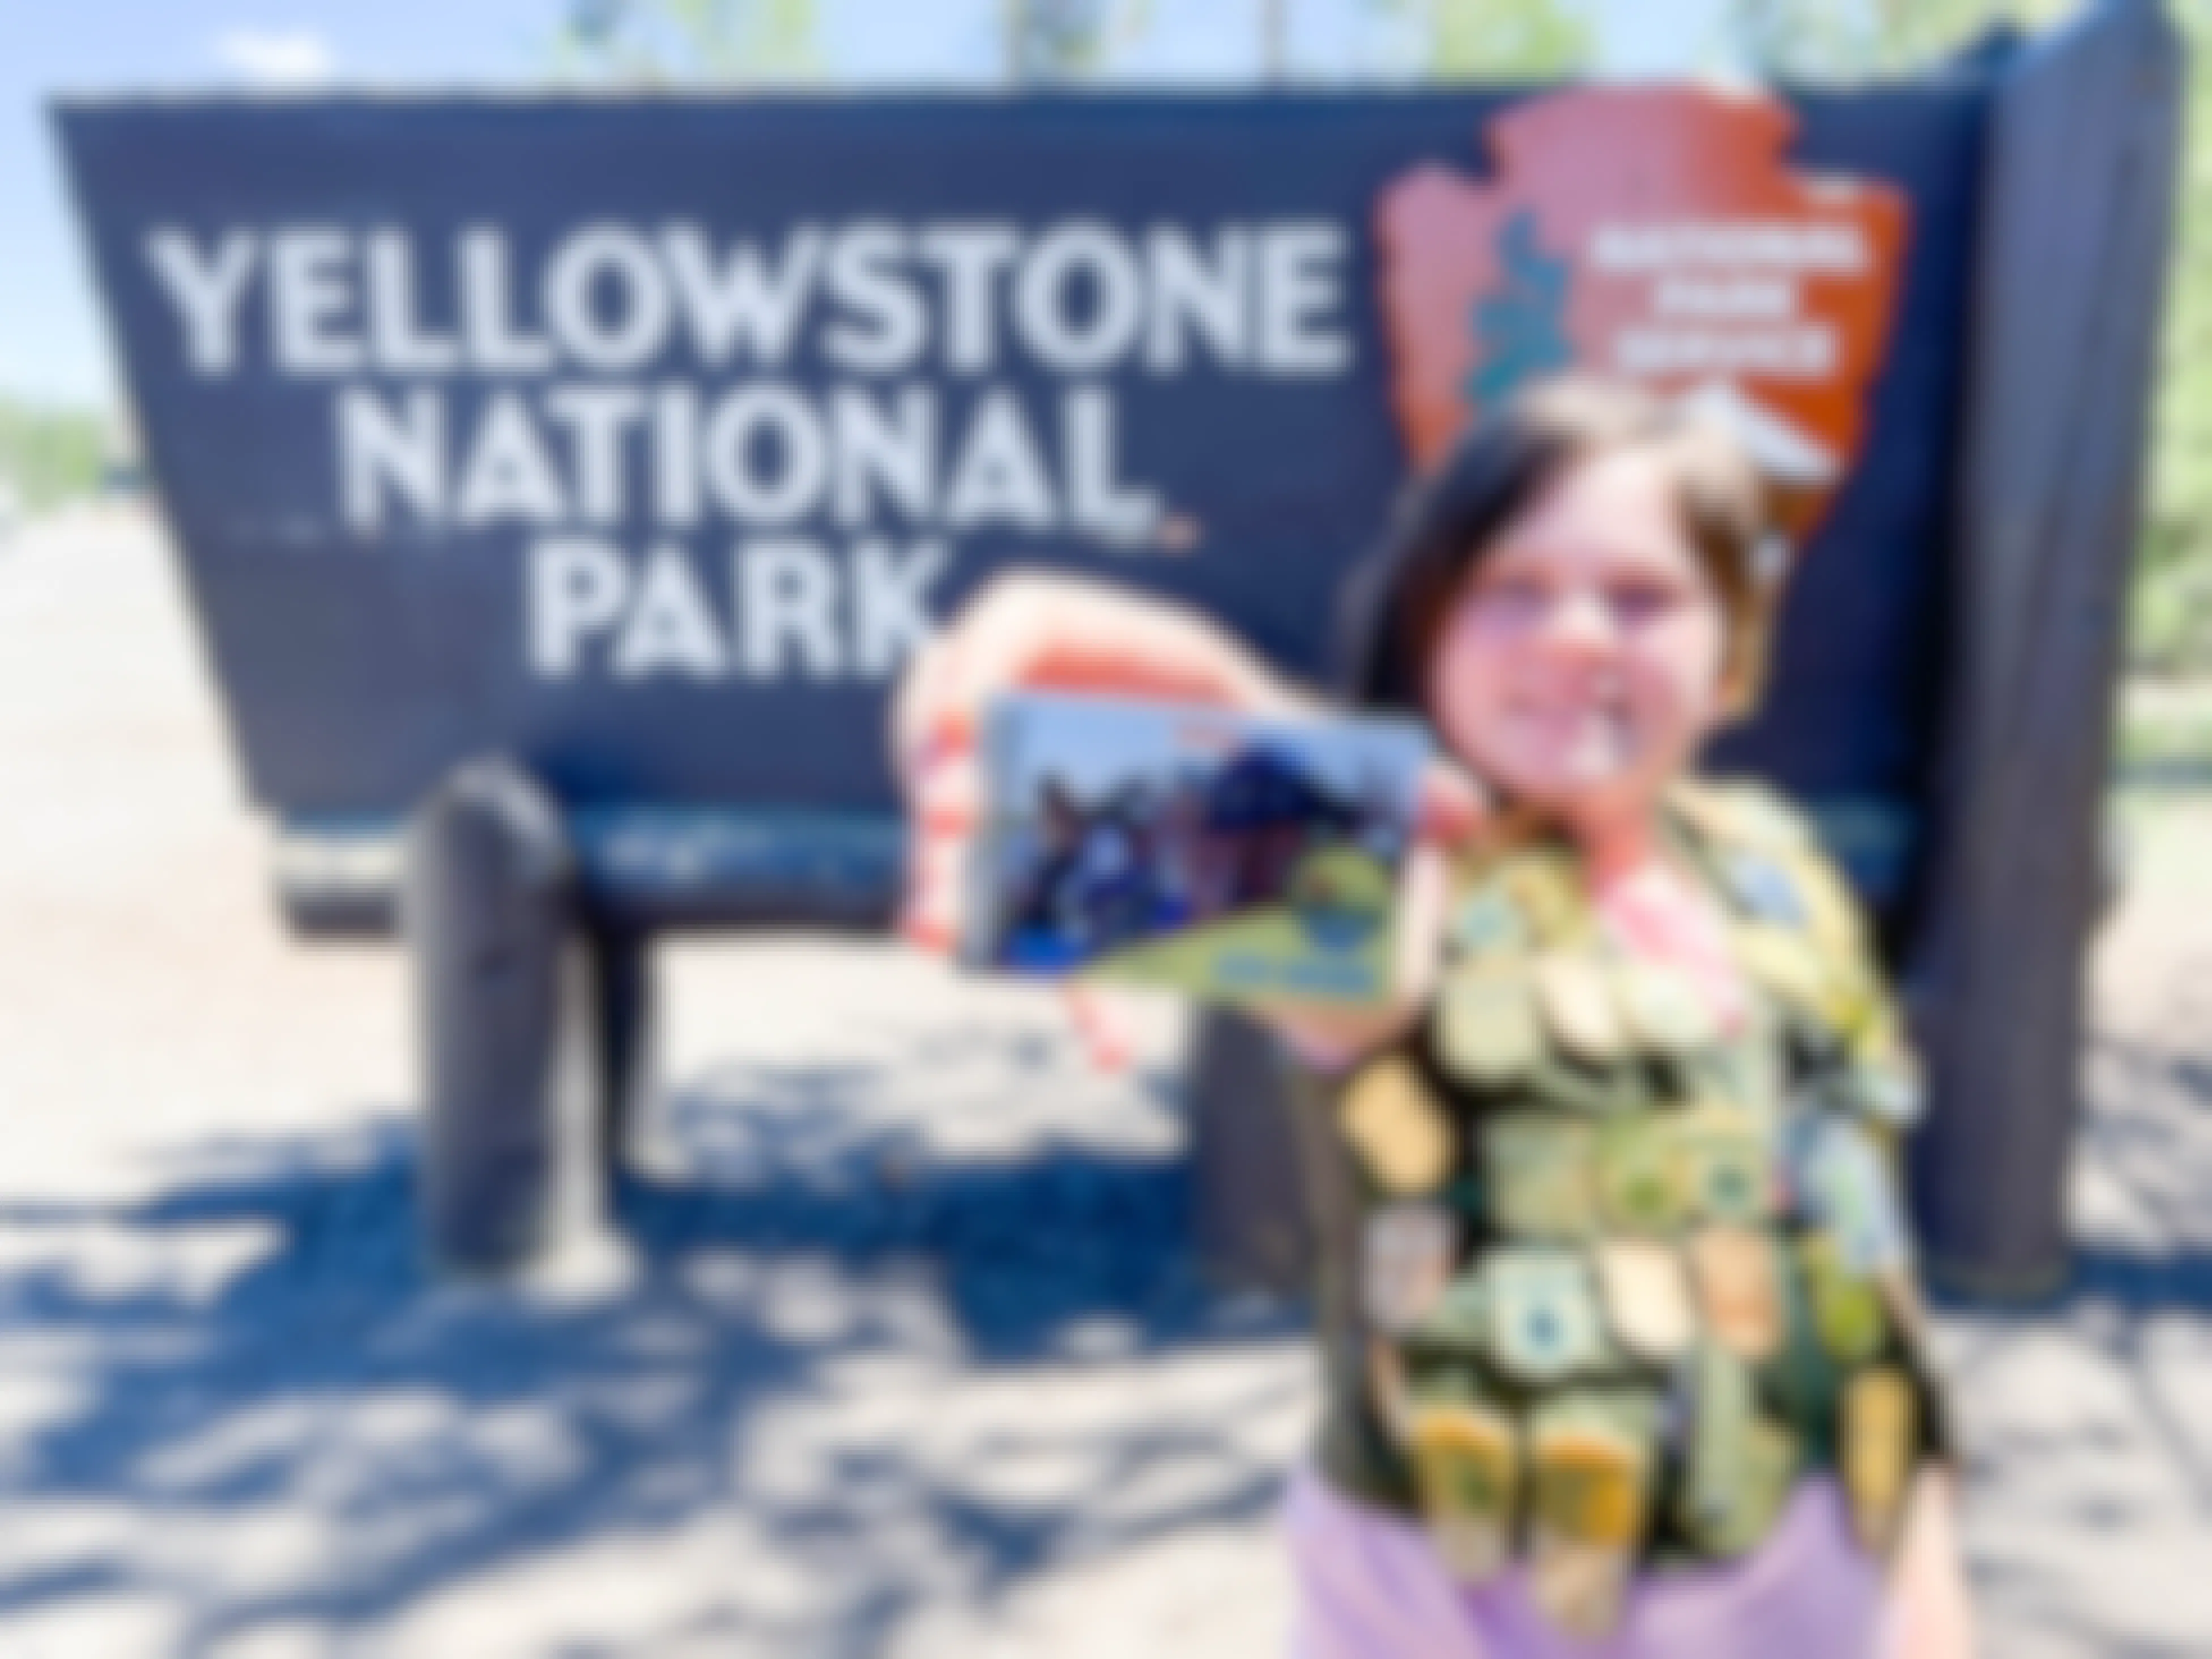 A child in front of the yellow stone national park sign wearing a vest covered in junior ranger badges. The child is holding out a free every kids outdoors national park pass.